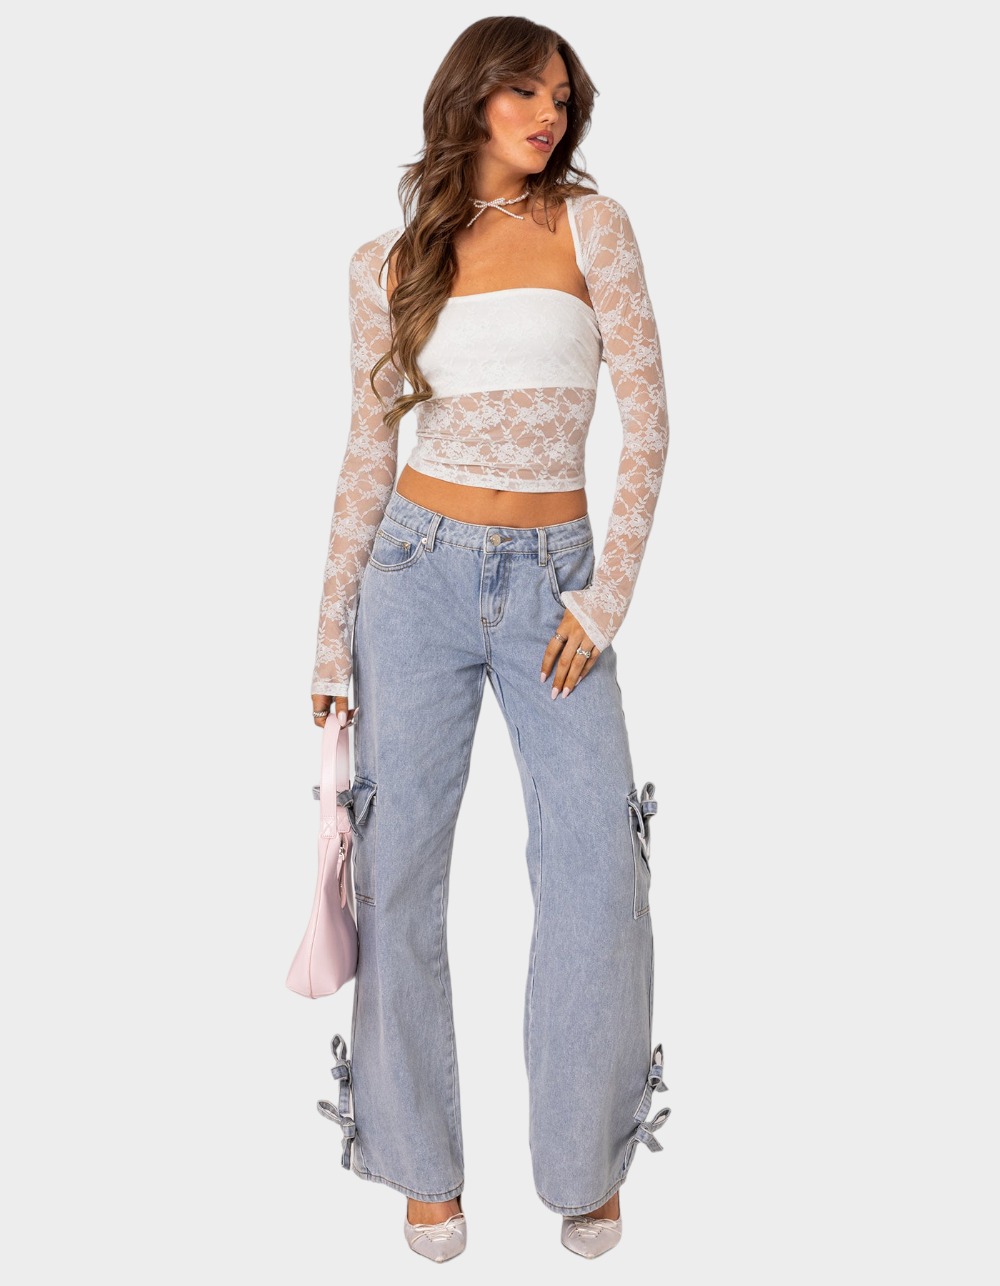 EDIKTED Addison Sheer Lace Top - Piece Tillys Two WHITE 